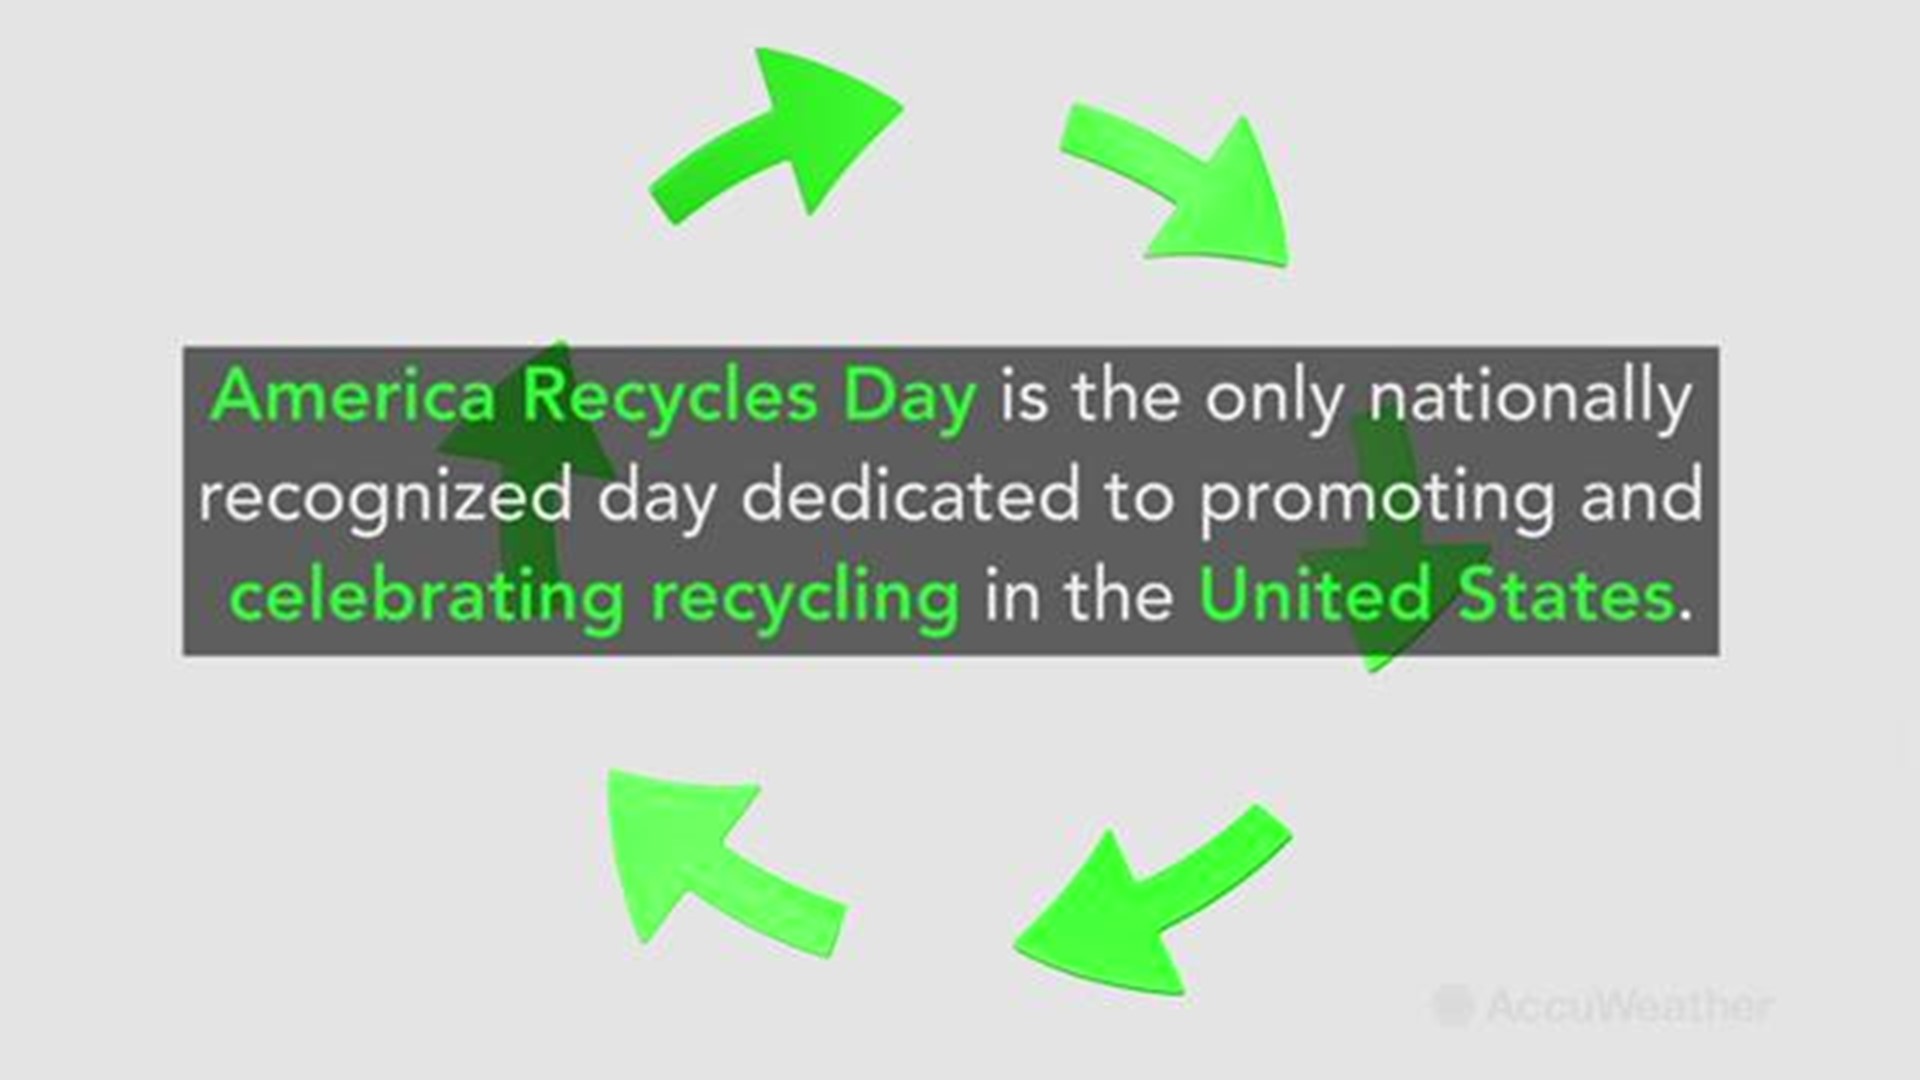 America Recycles Day is the only nationally recognized day dedicated to promoting and celebrating recycling in the United States.